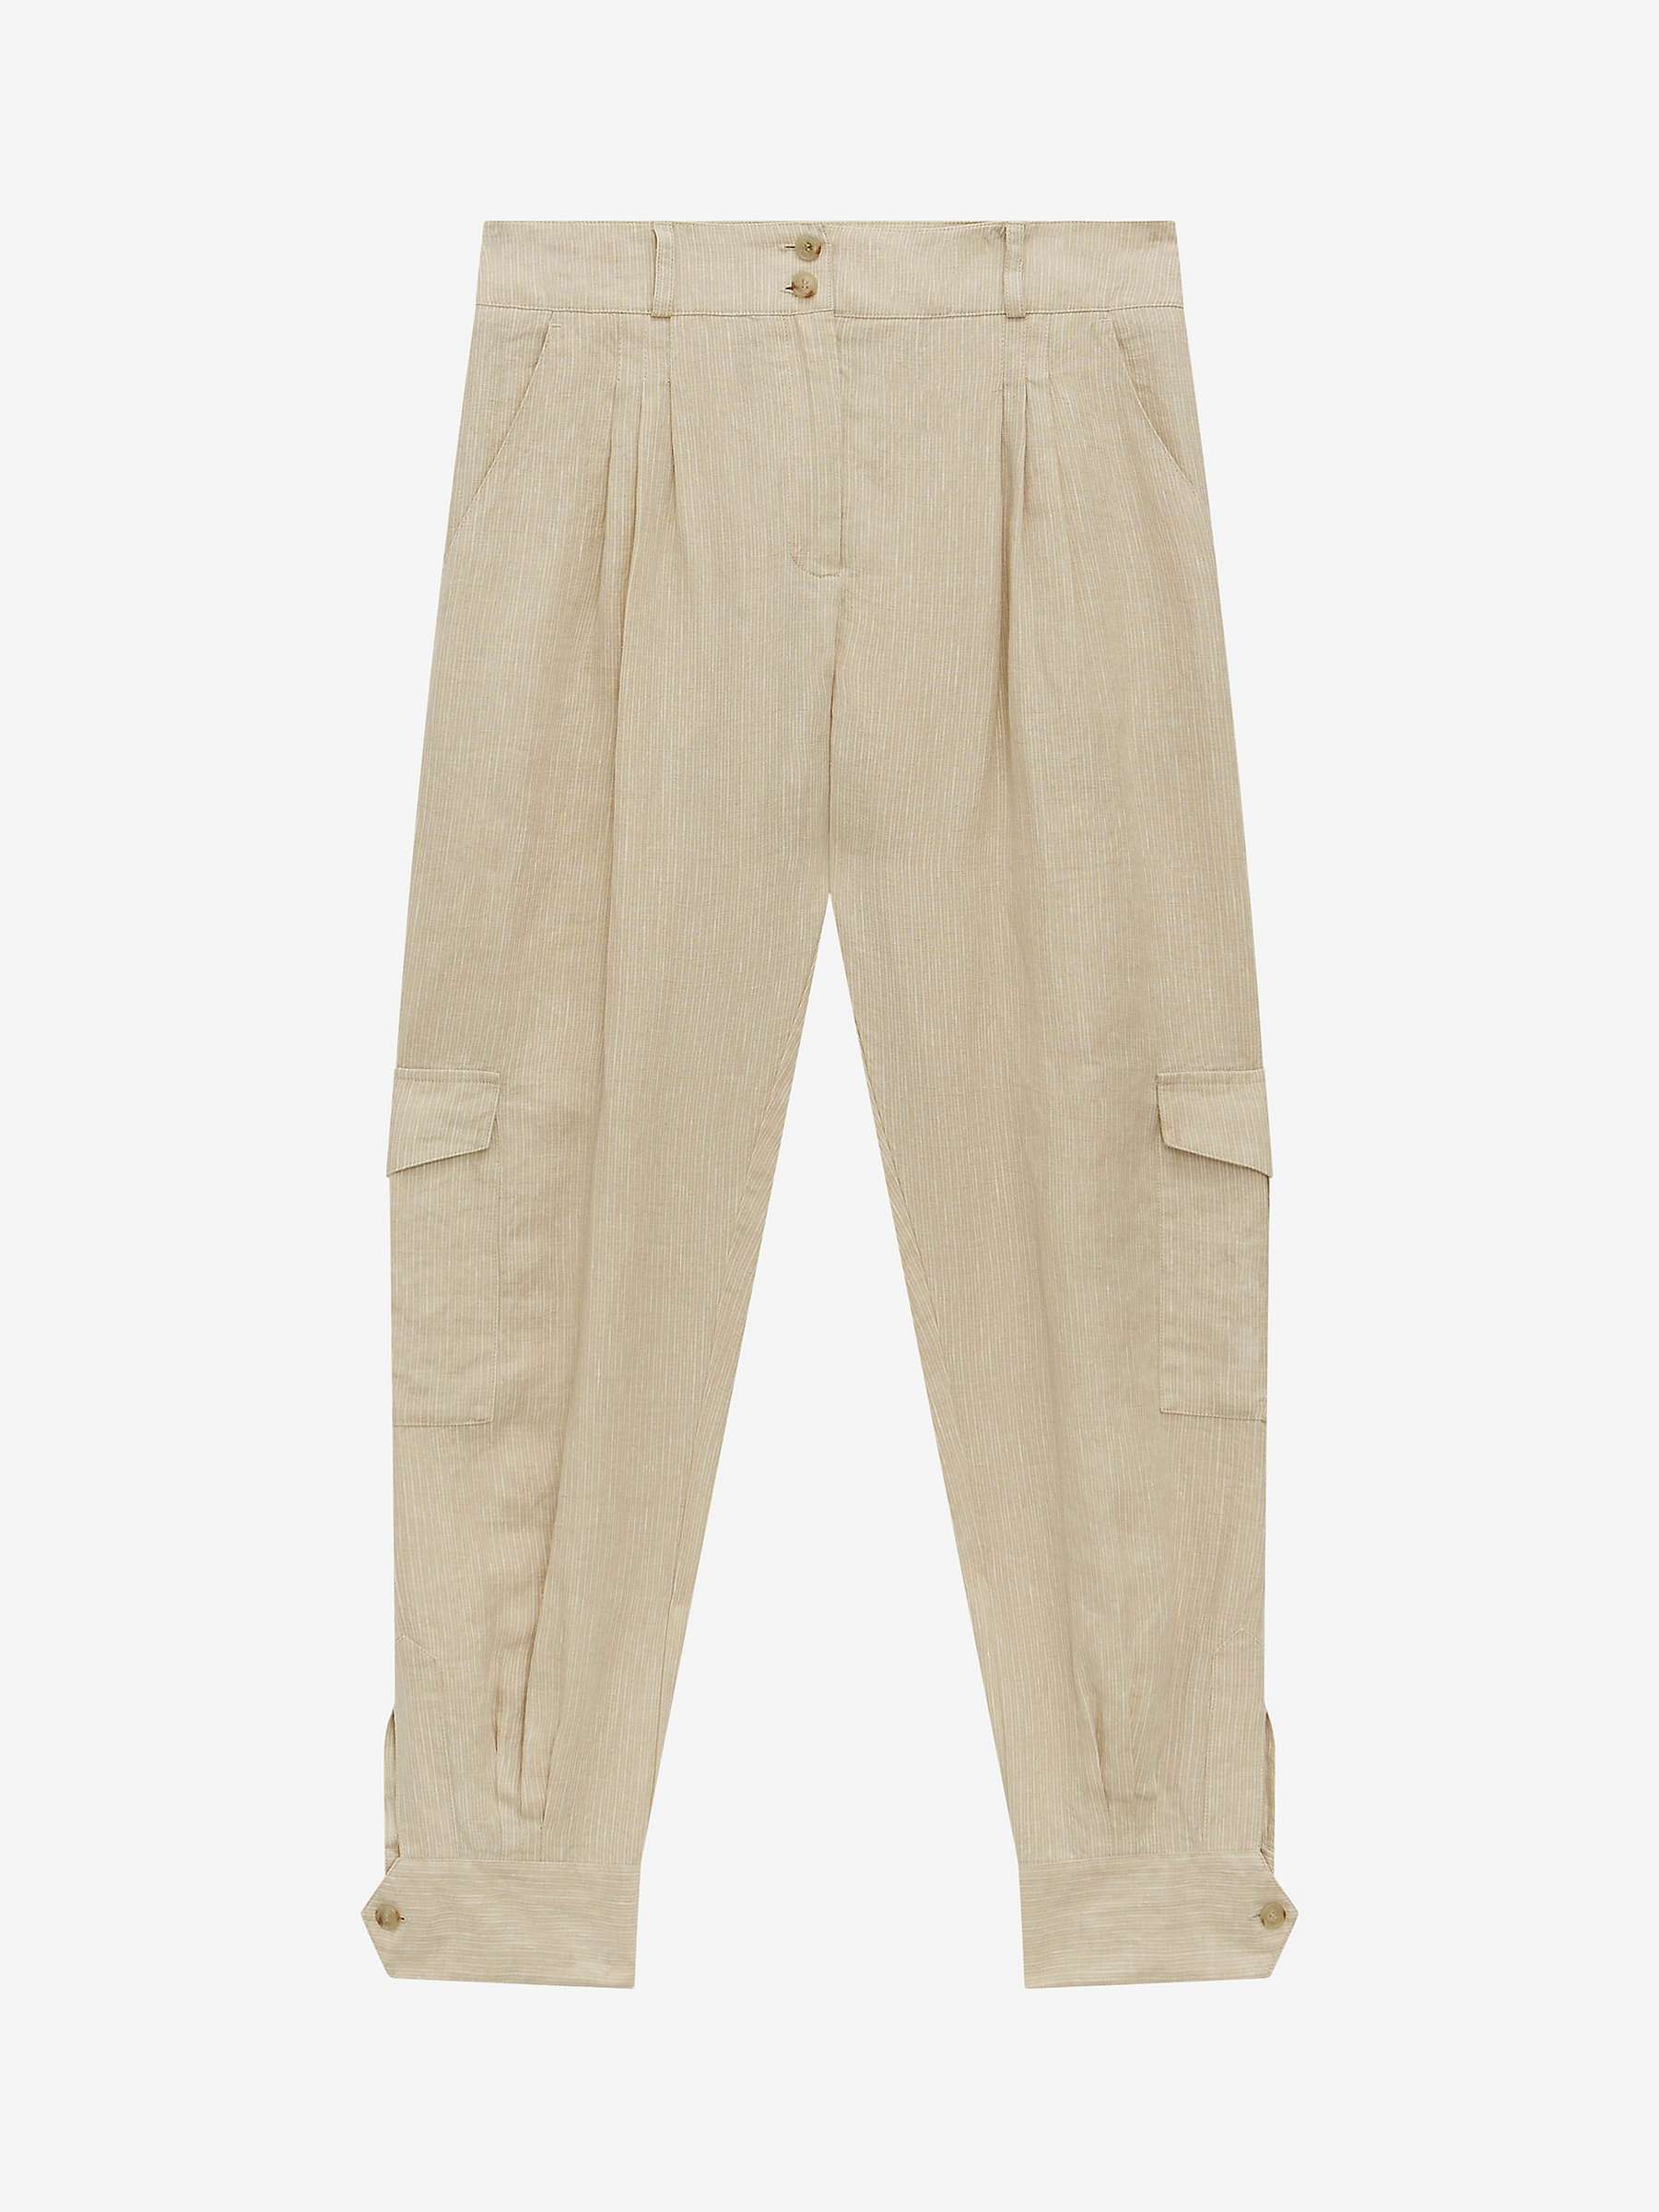 Buy Brora Textured Stripe Linen Cargo Trousers, Natural Online at johnlewis.com